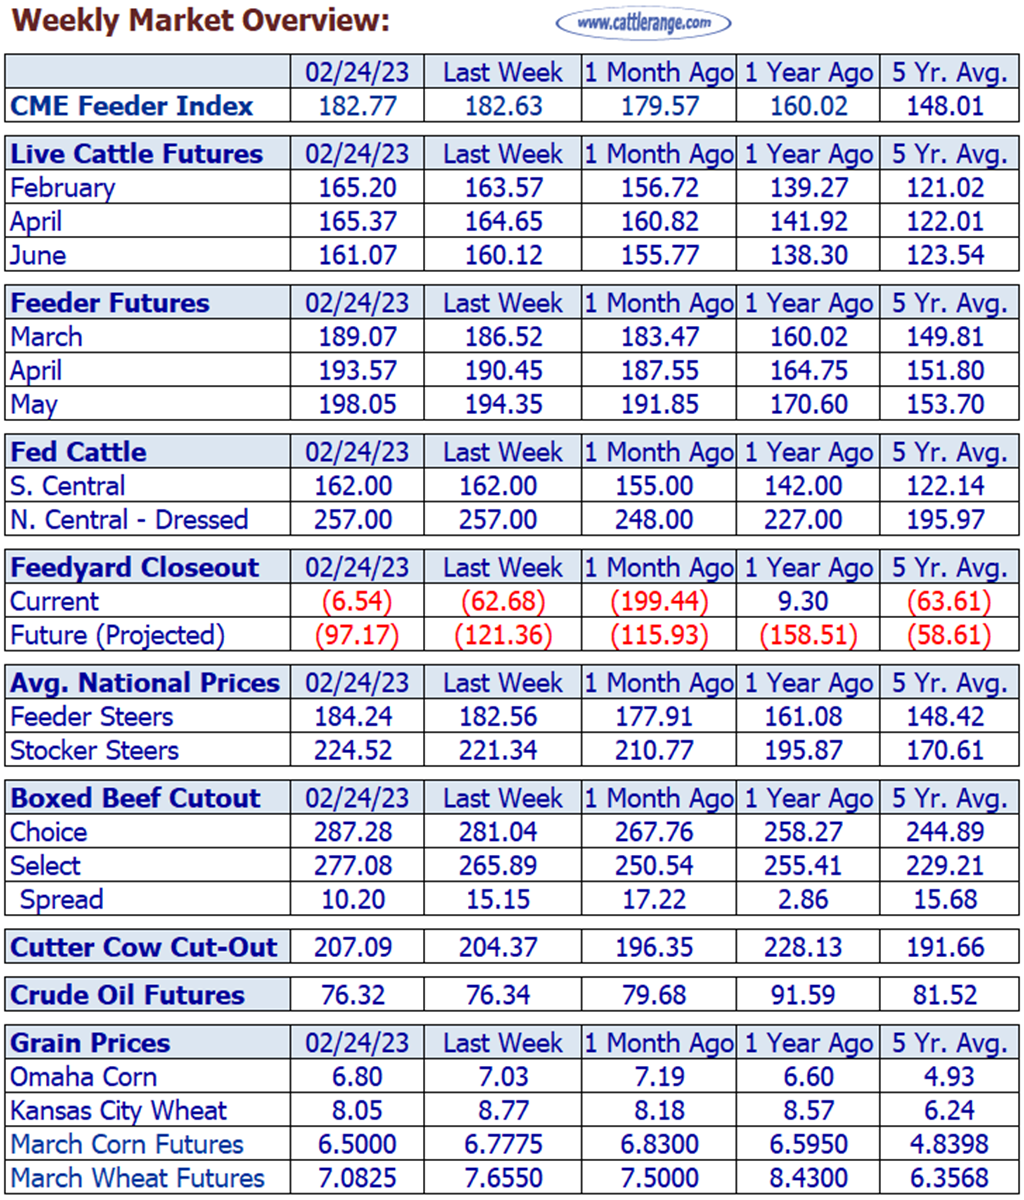 Weekly Cattle Market Overview for Week Ending 3/3/23